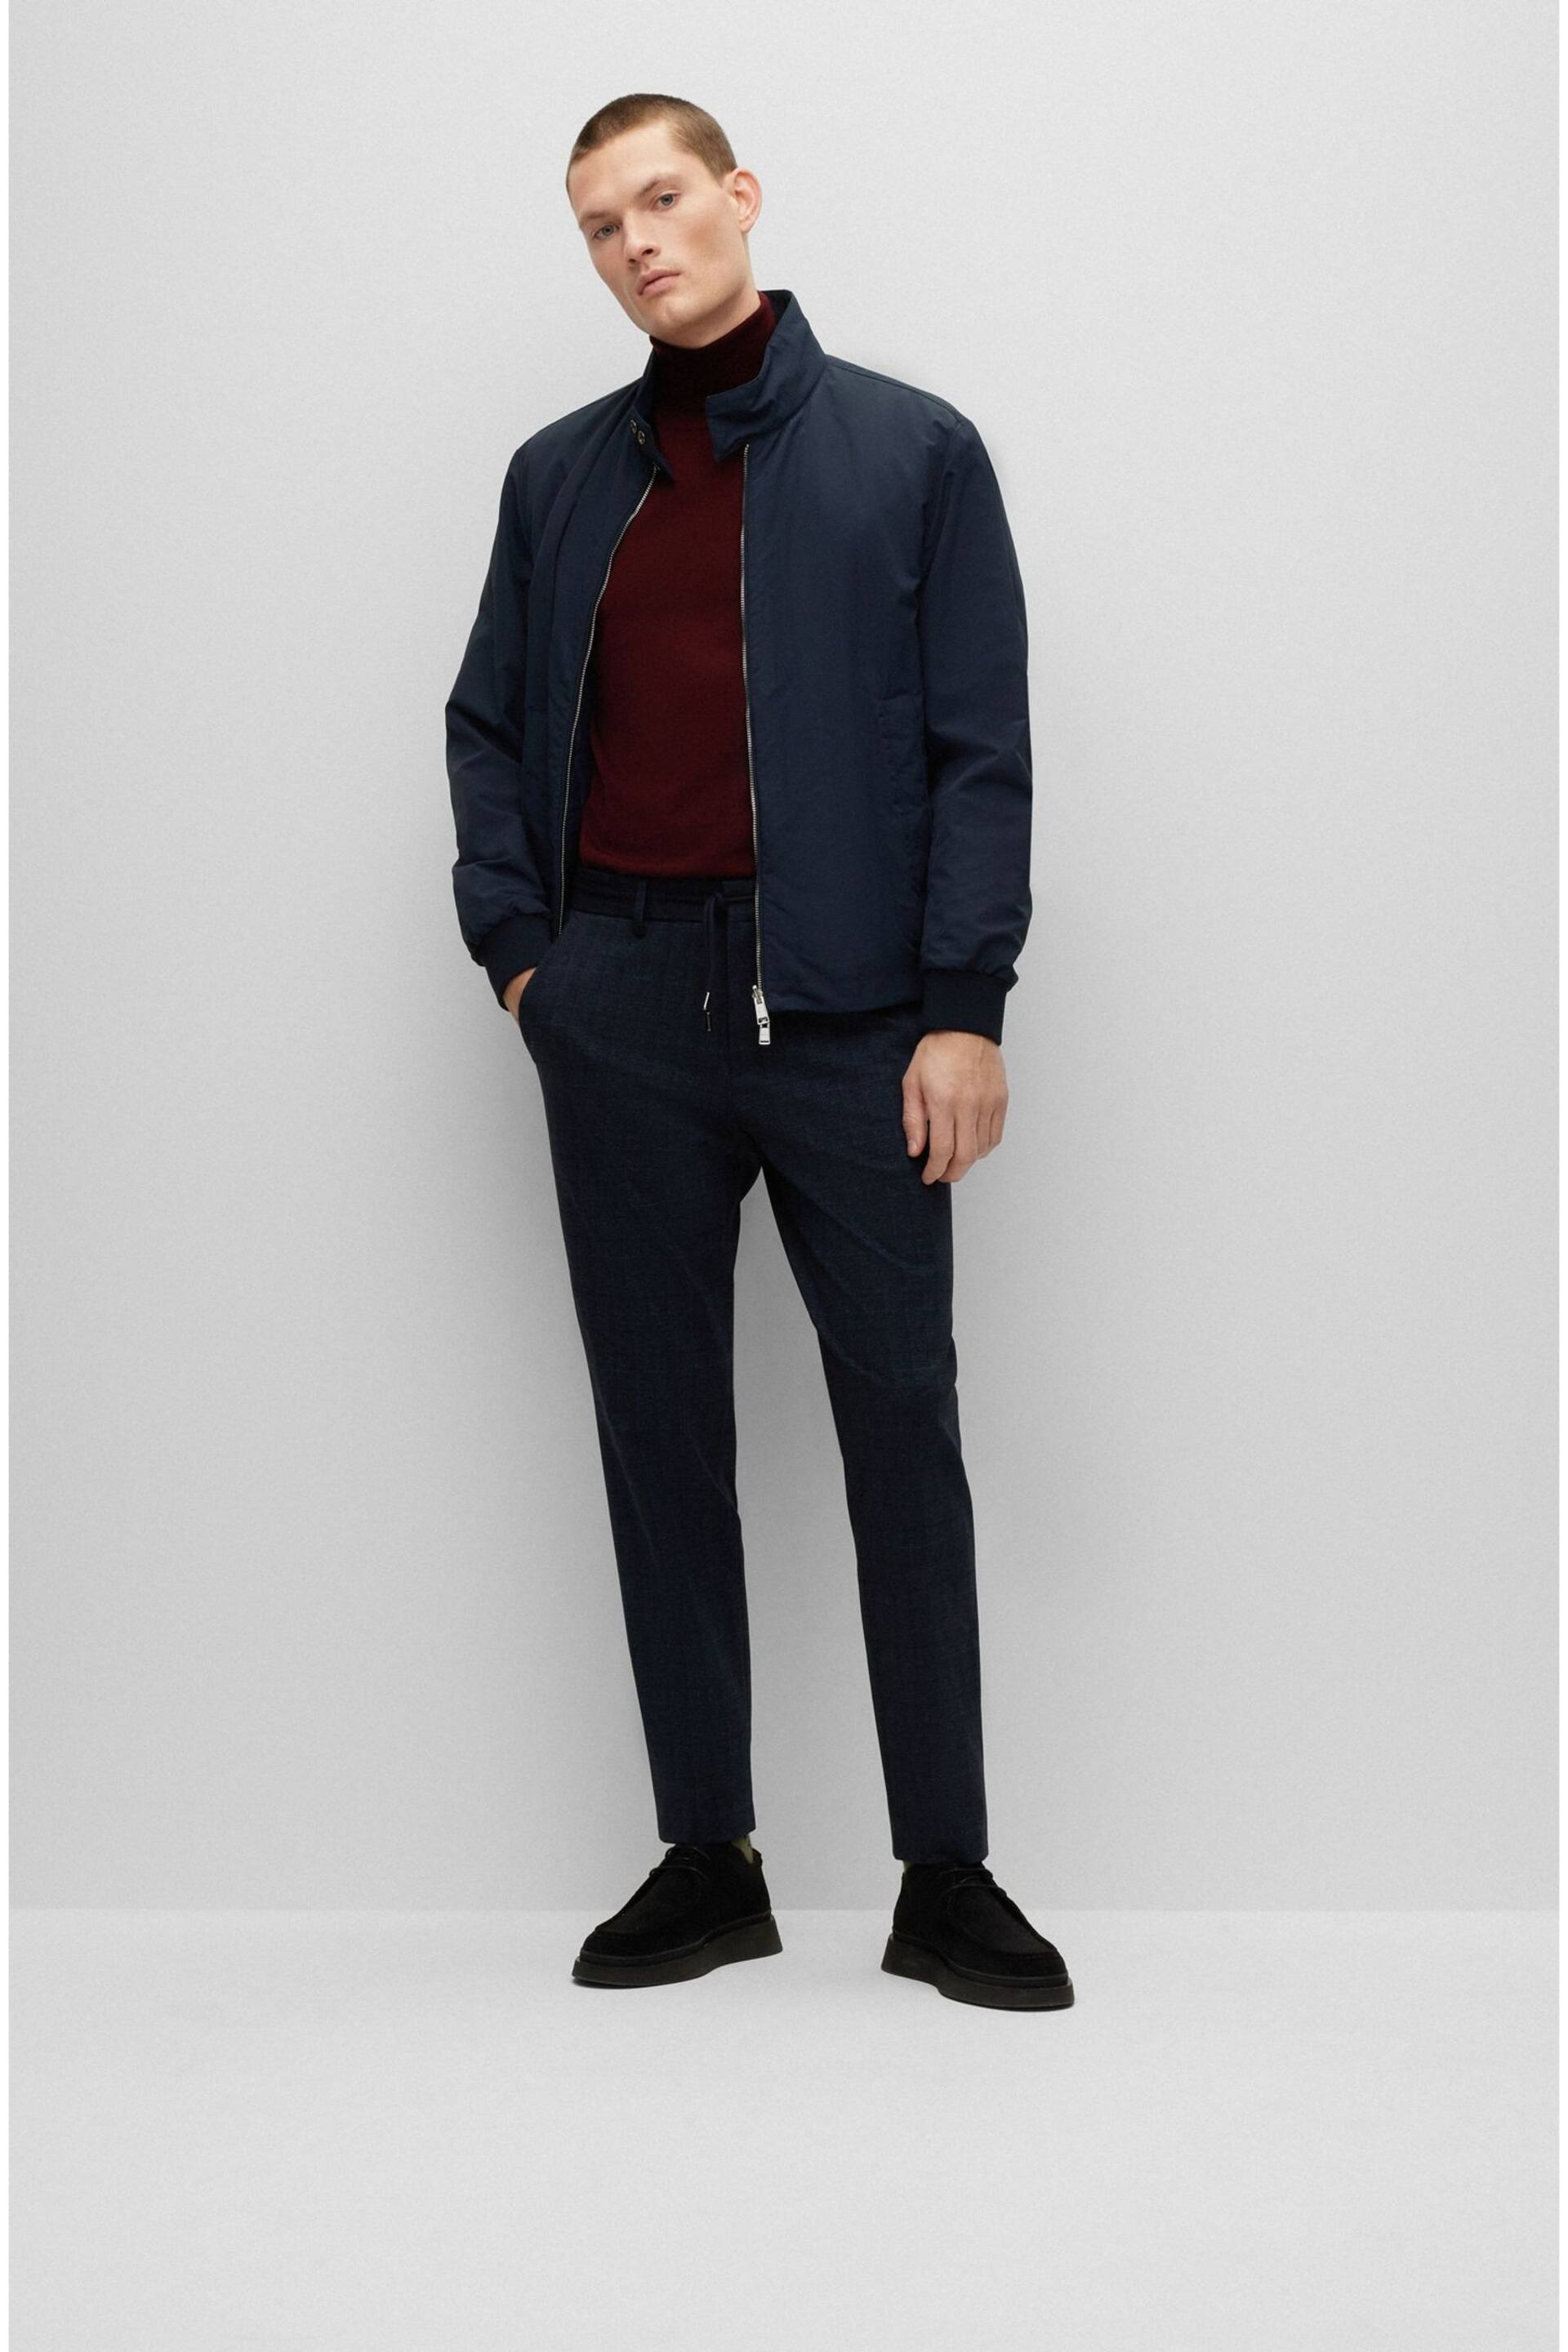 BOSS Dark Blue Tapered Fit Contempory Check Trousers - Image 3 of 10